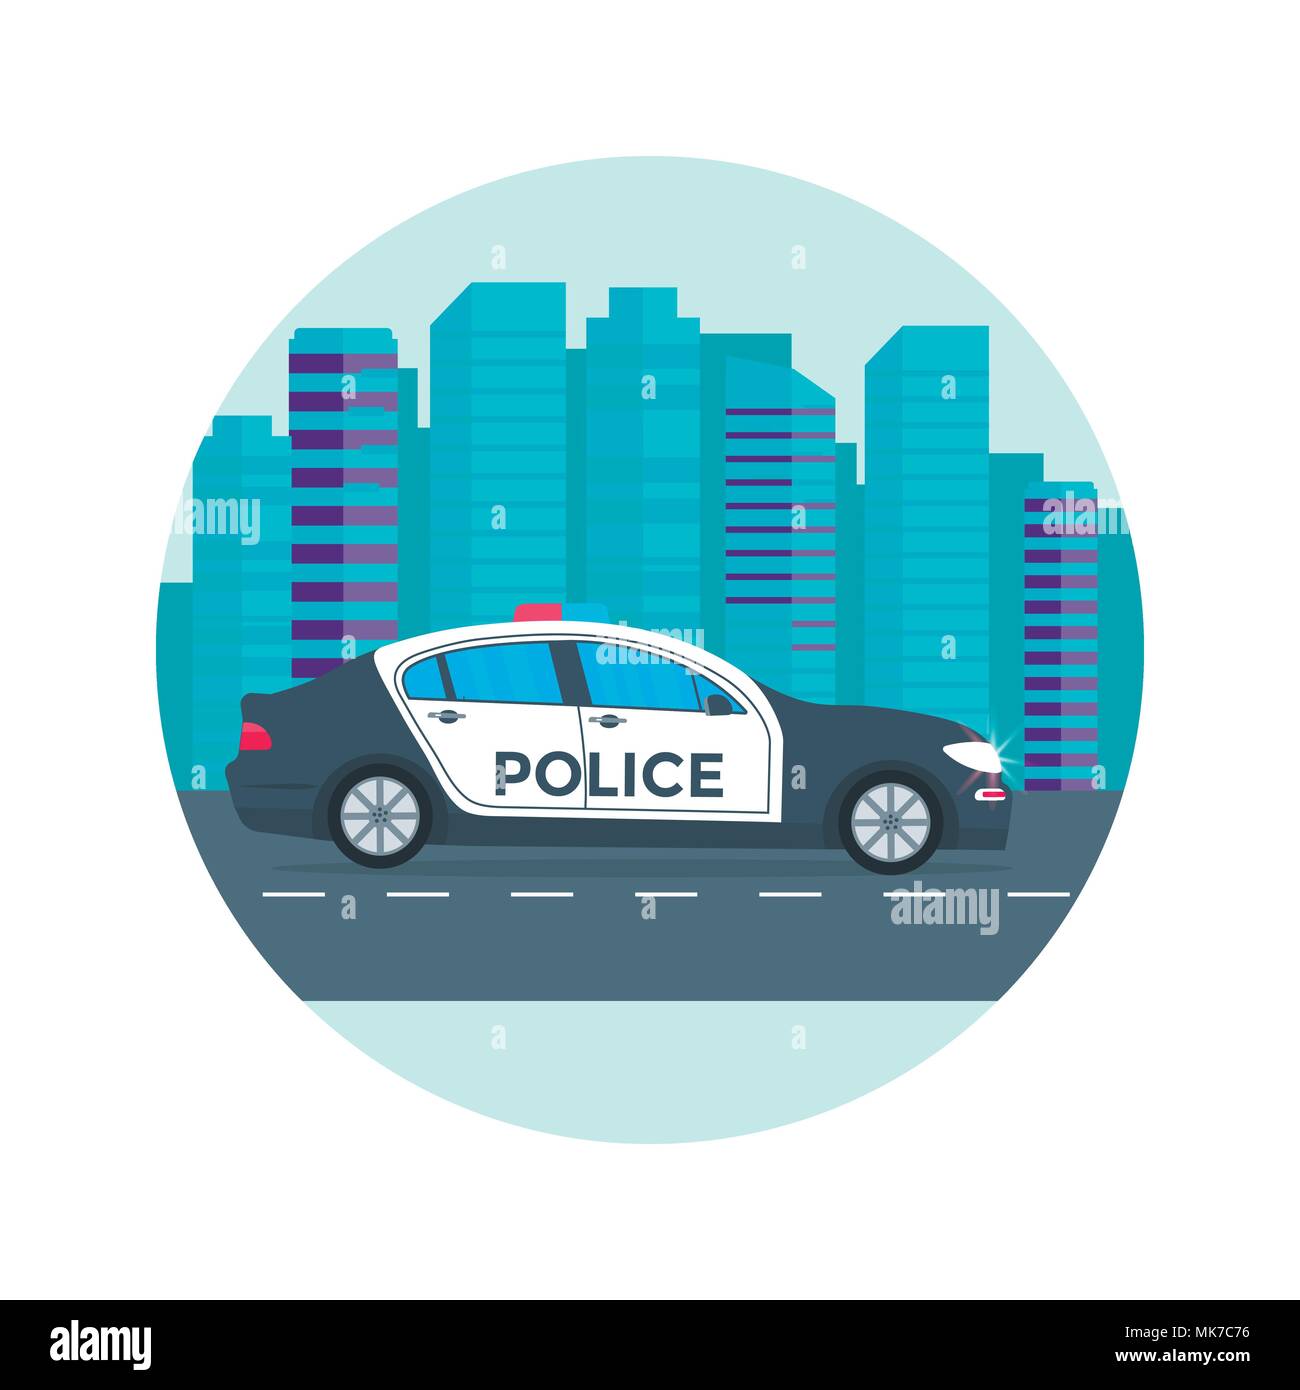 Police patrol on a road with police car. vehicle with rooftop flashing lights. Flat vector illustration. Stock Vector